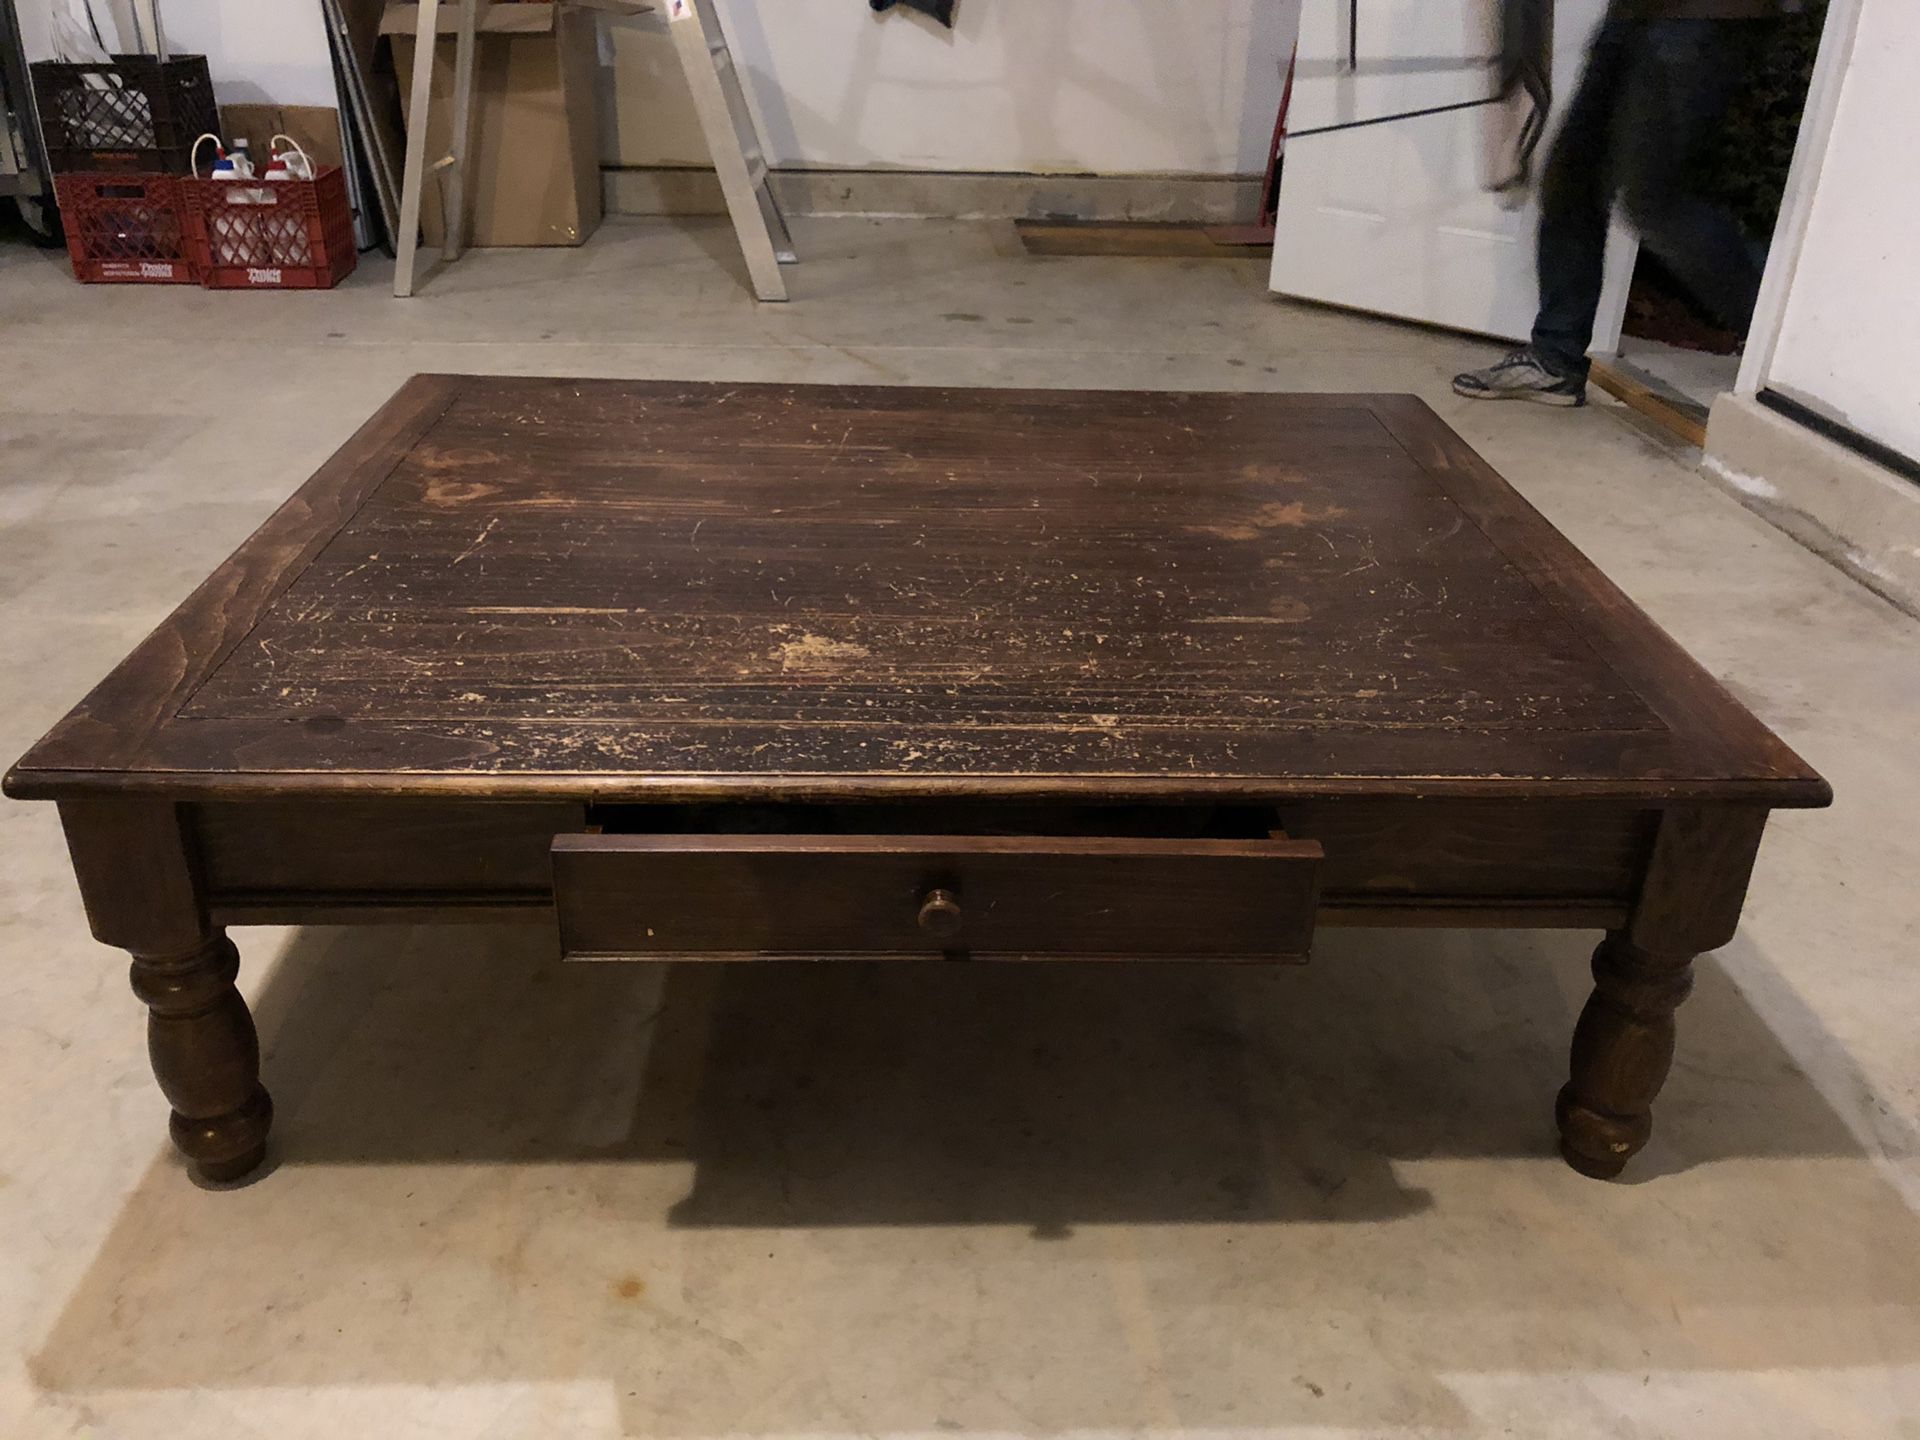 Wood coffee table with drawer